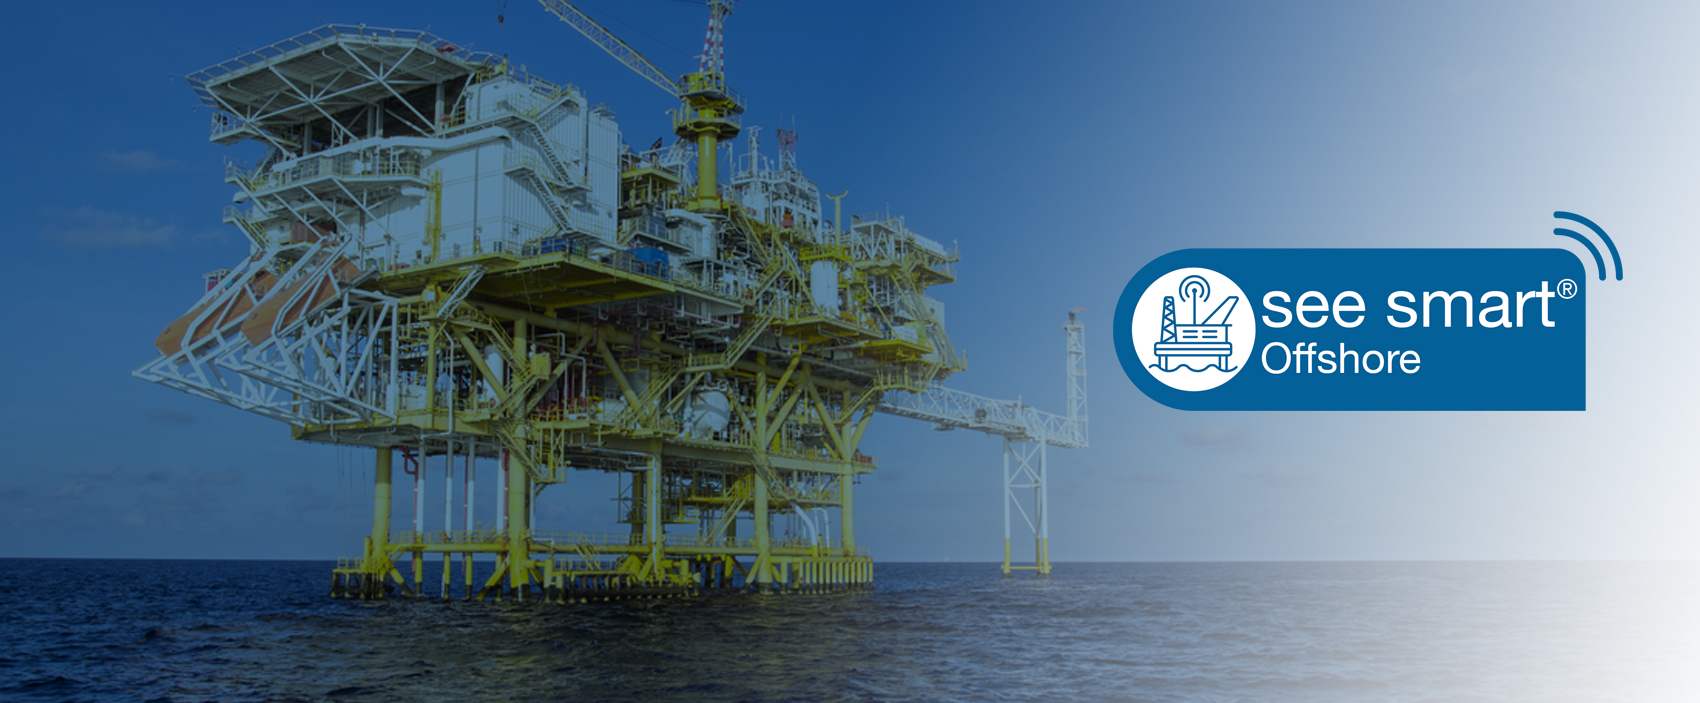 See smart offshore - radio coverage solutions for the offshore industry